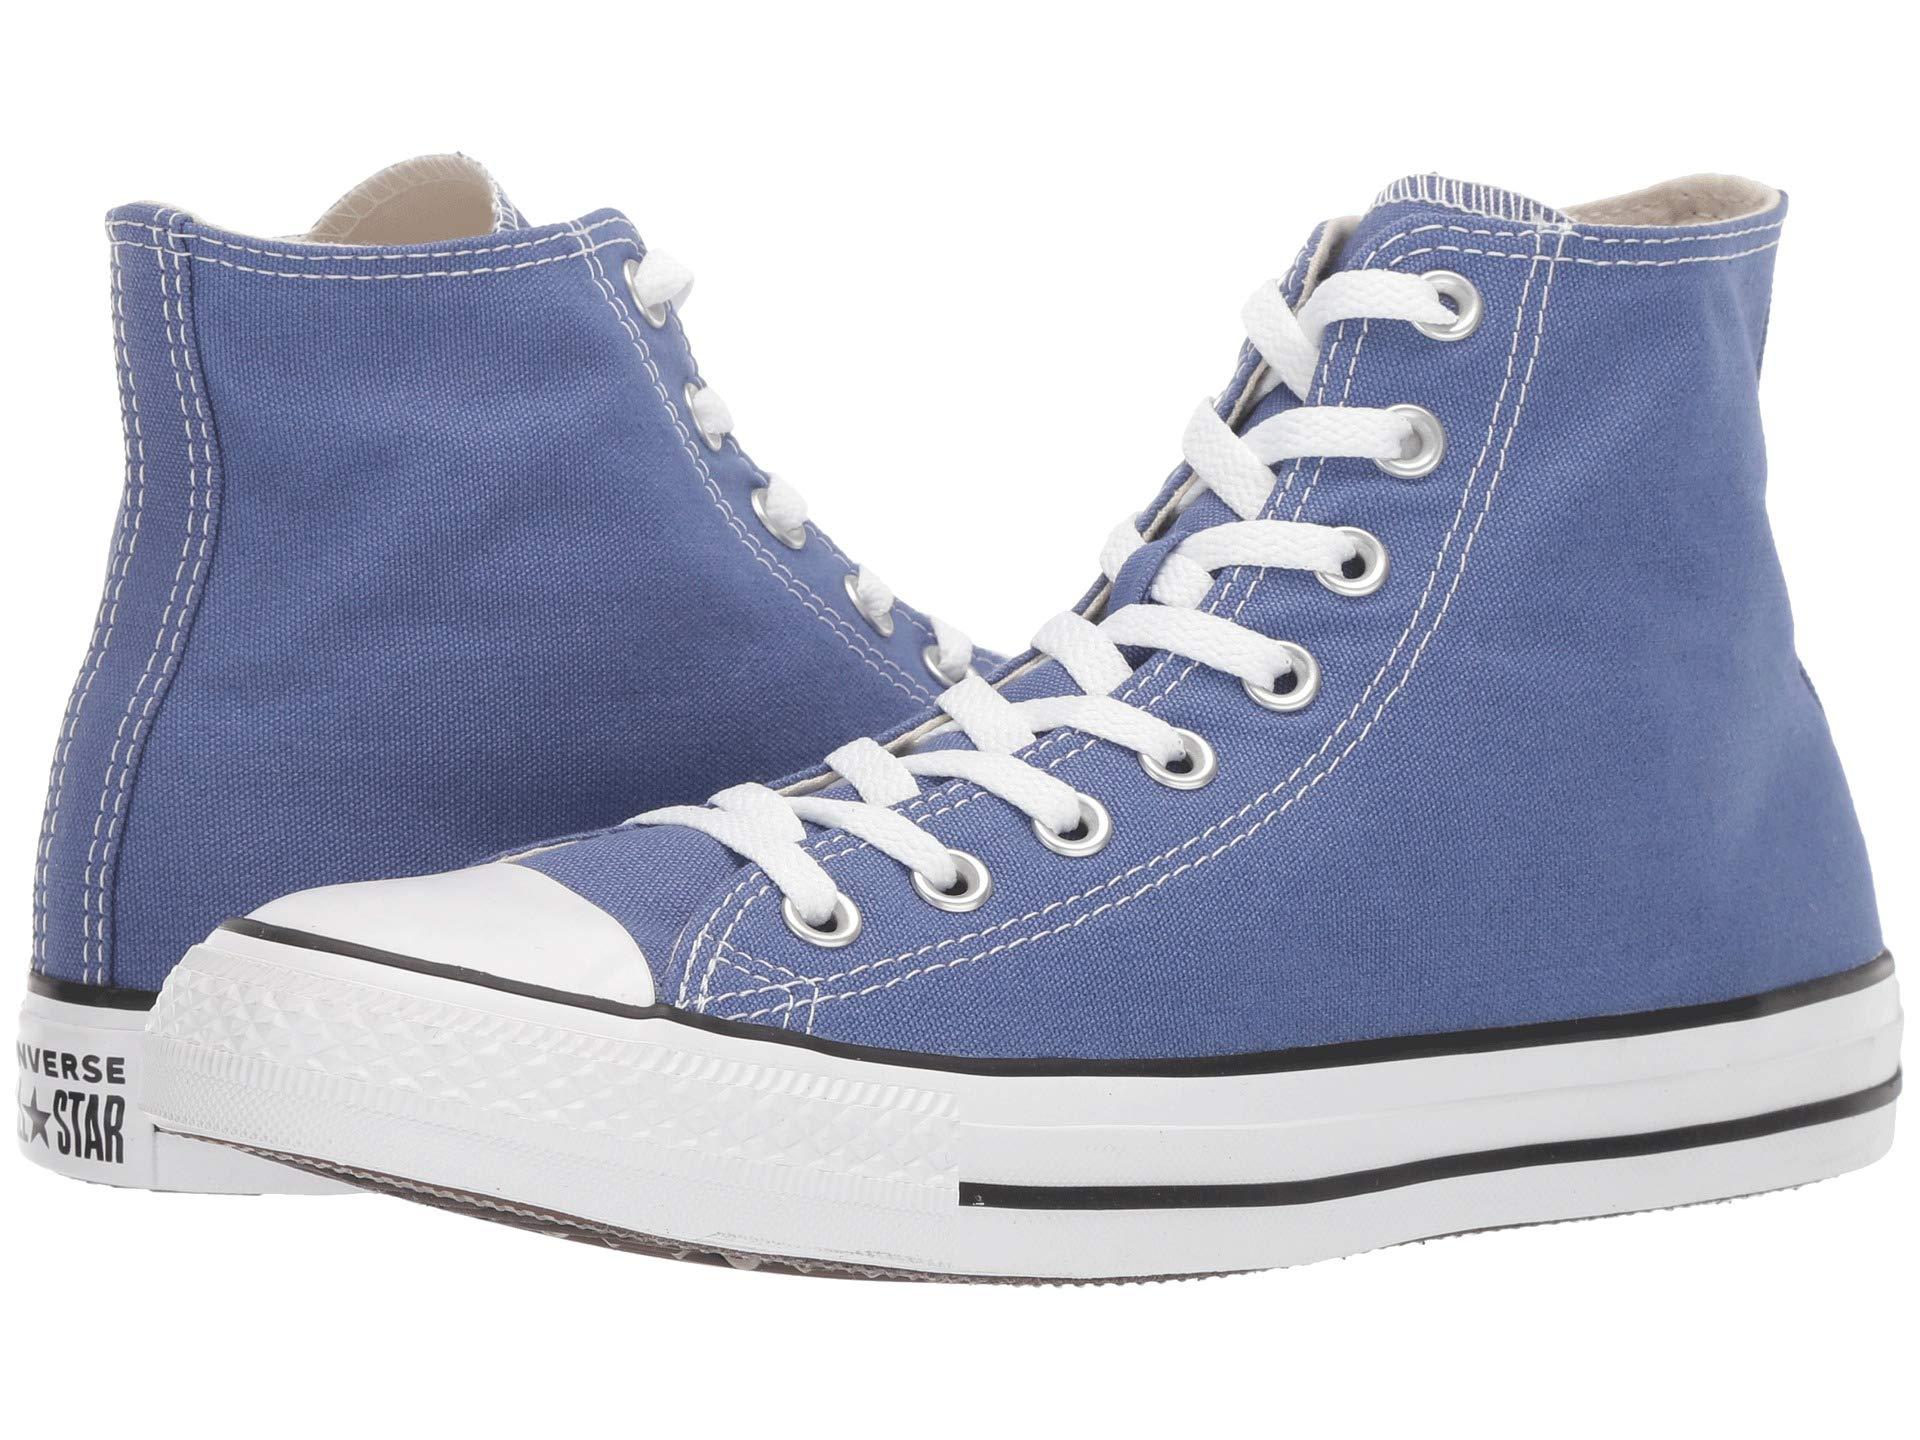 Converse Chuck Taylor All Star Washed Indigo High Top Womens Shoes in ...